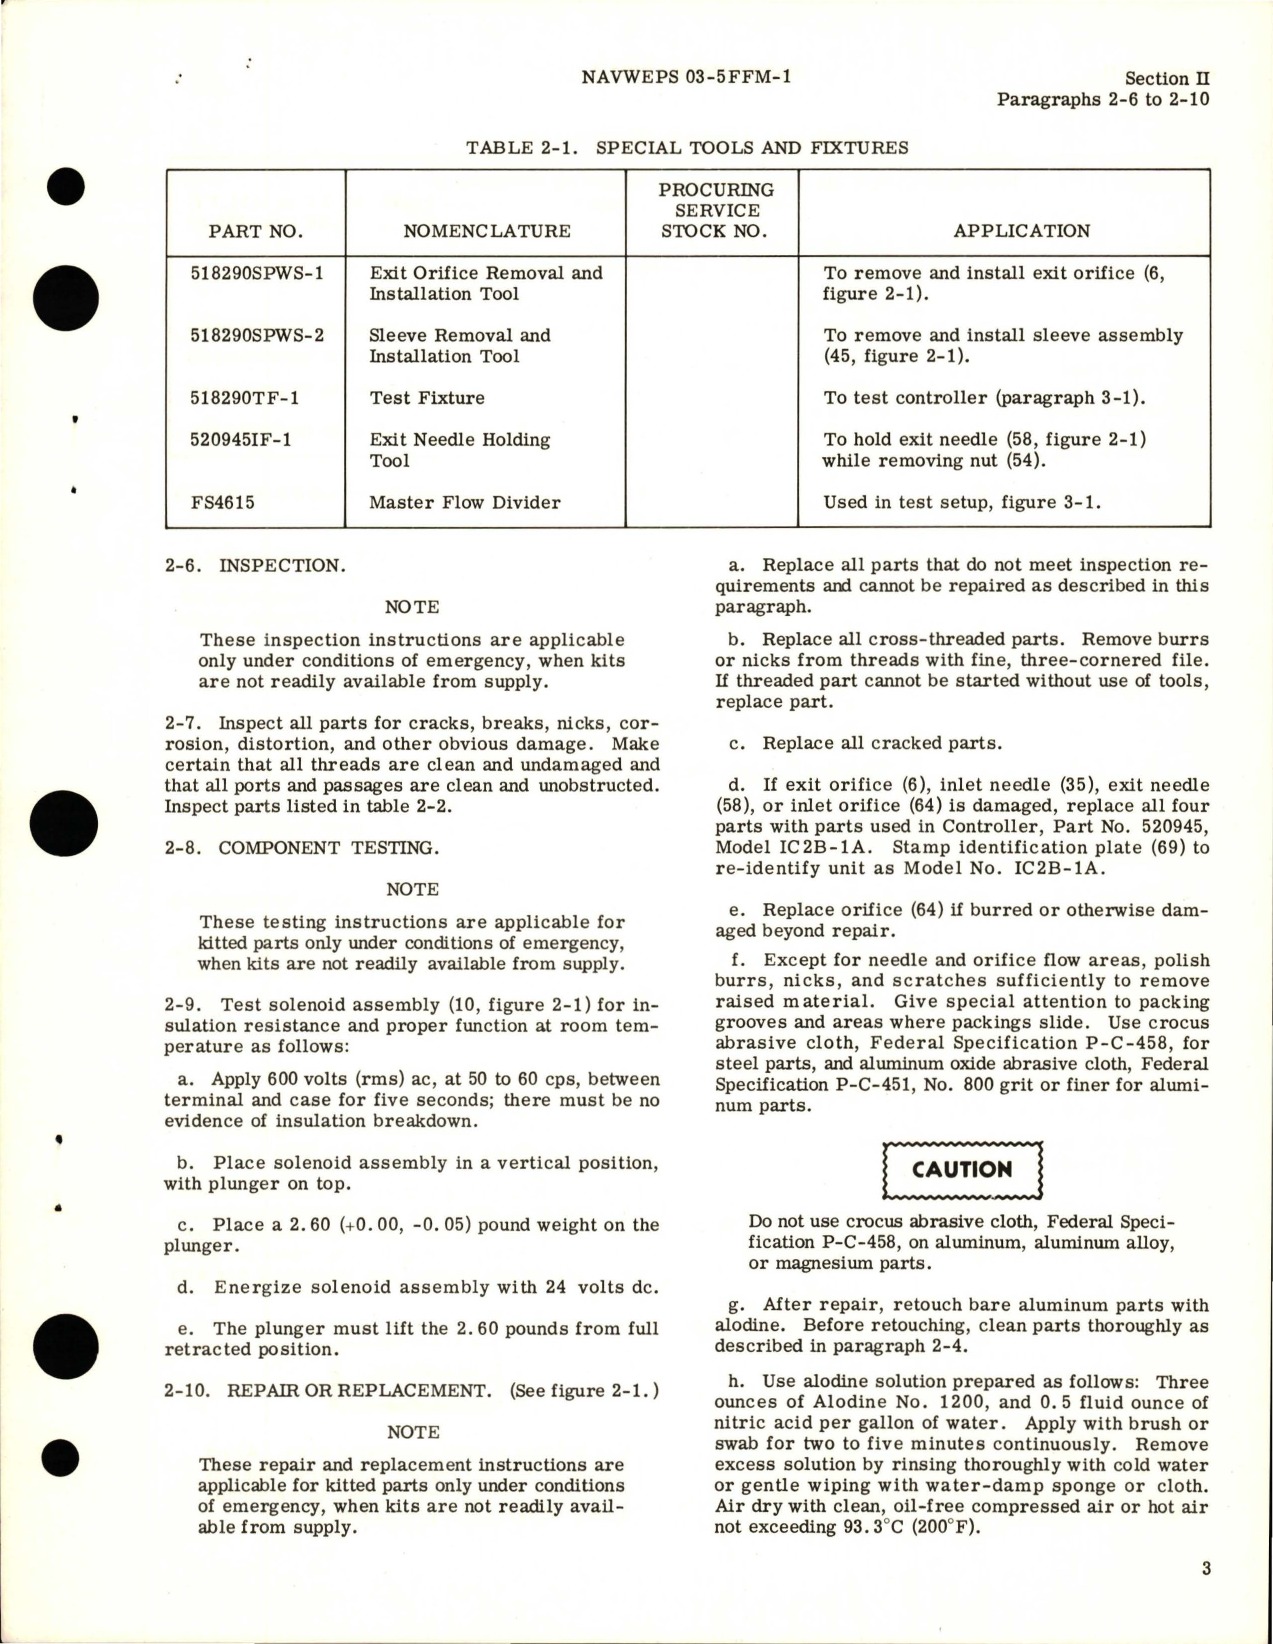 Sample page 7 from AirCorps Library document: Overhaul Instructions for By-Pass Controller - Models IC2B-1, IC2B-1A, and IC2B-1B - Part 520945